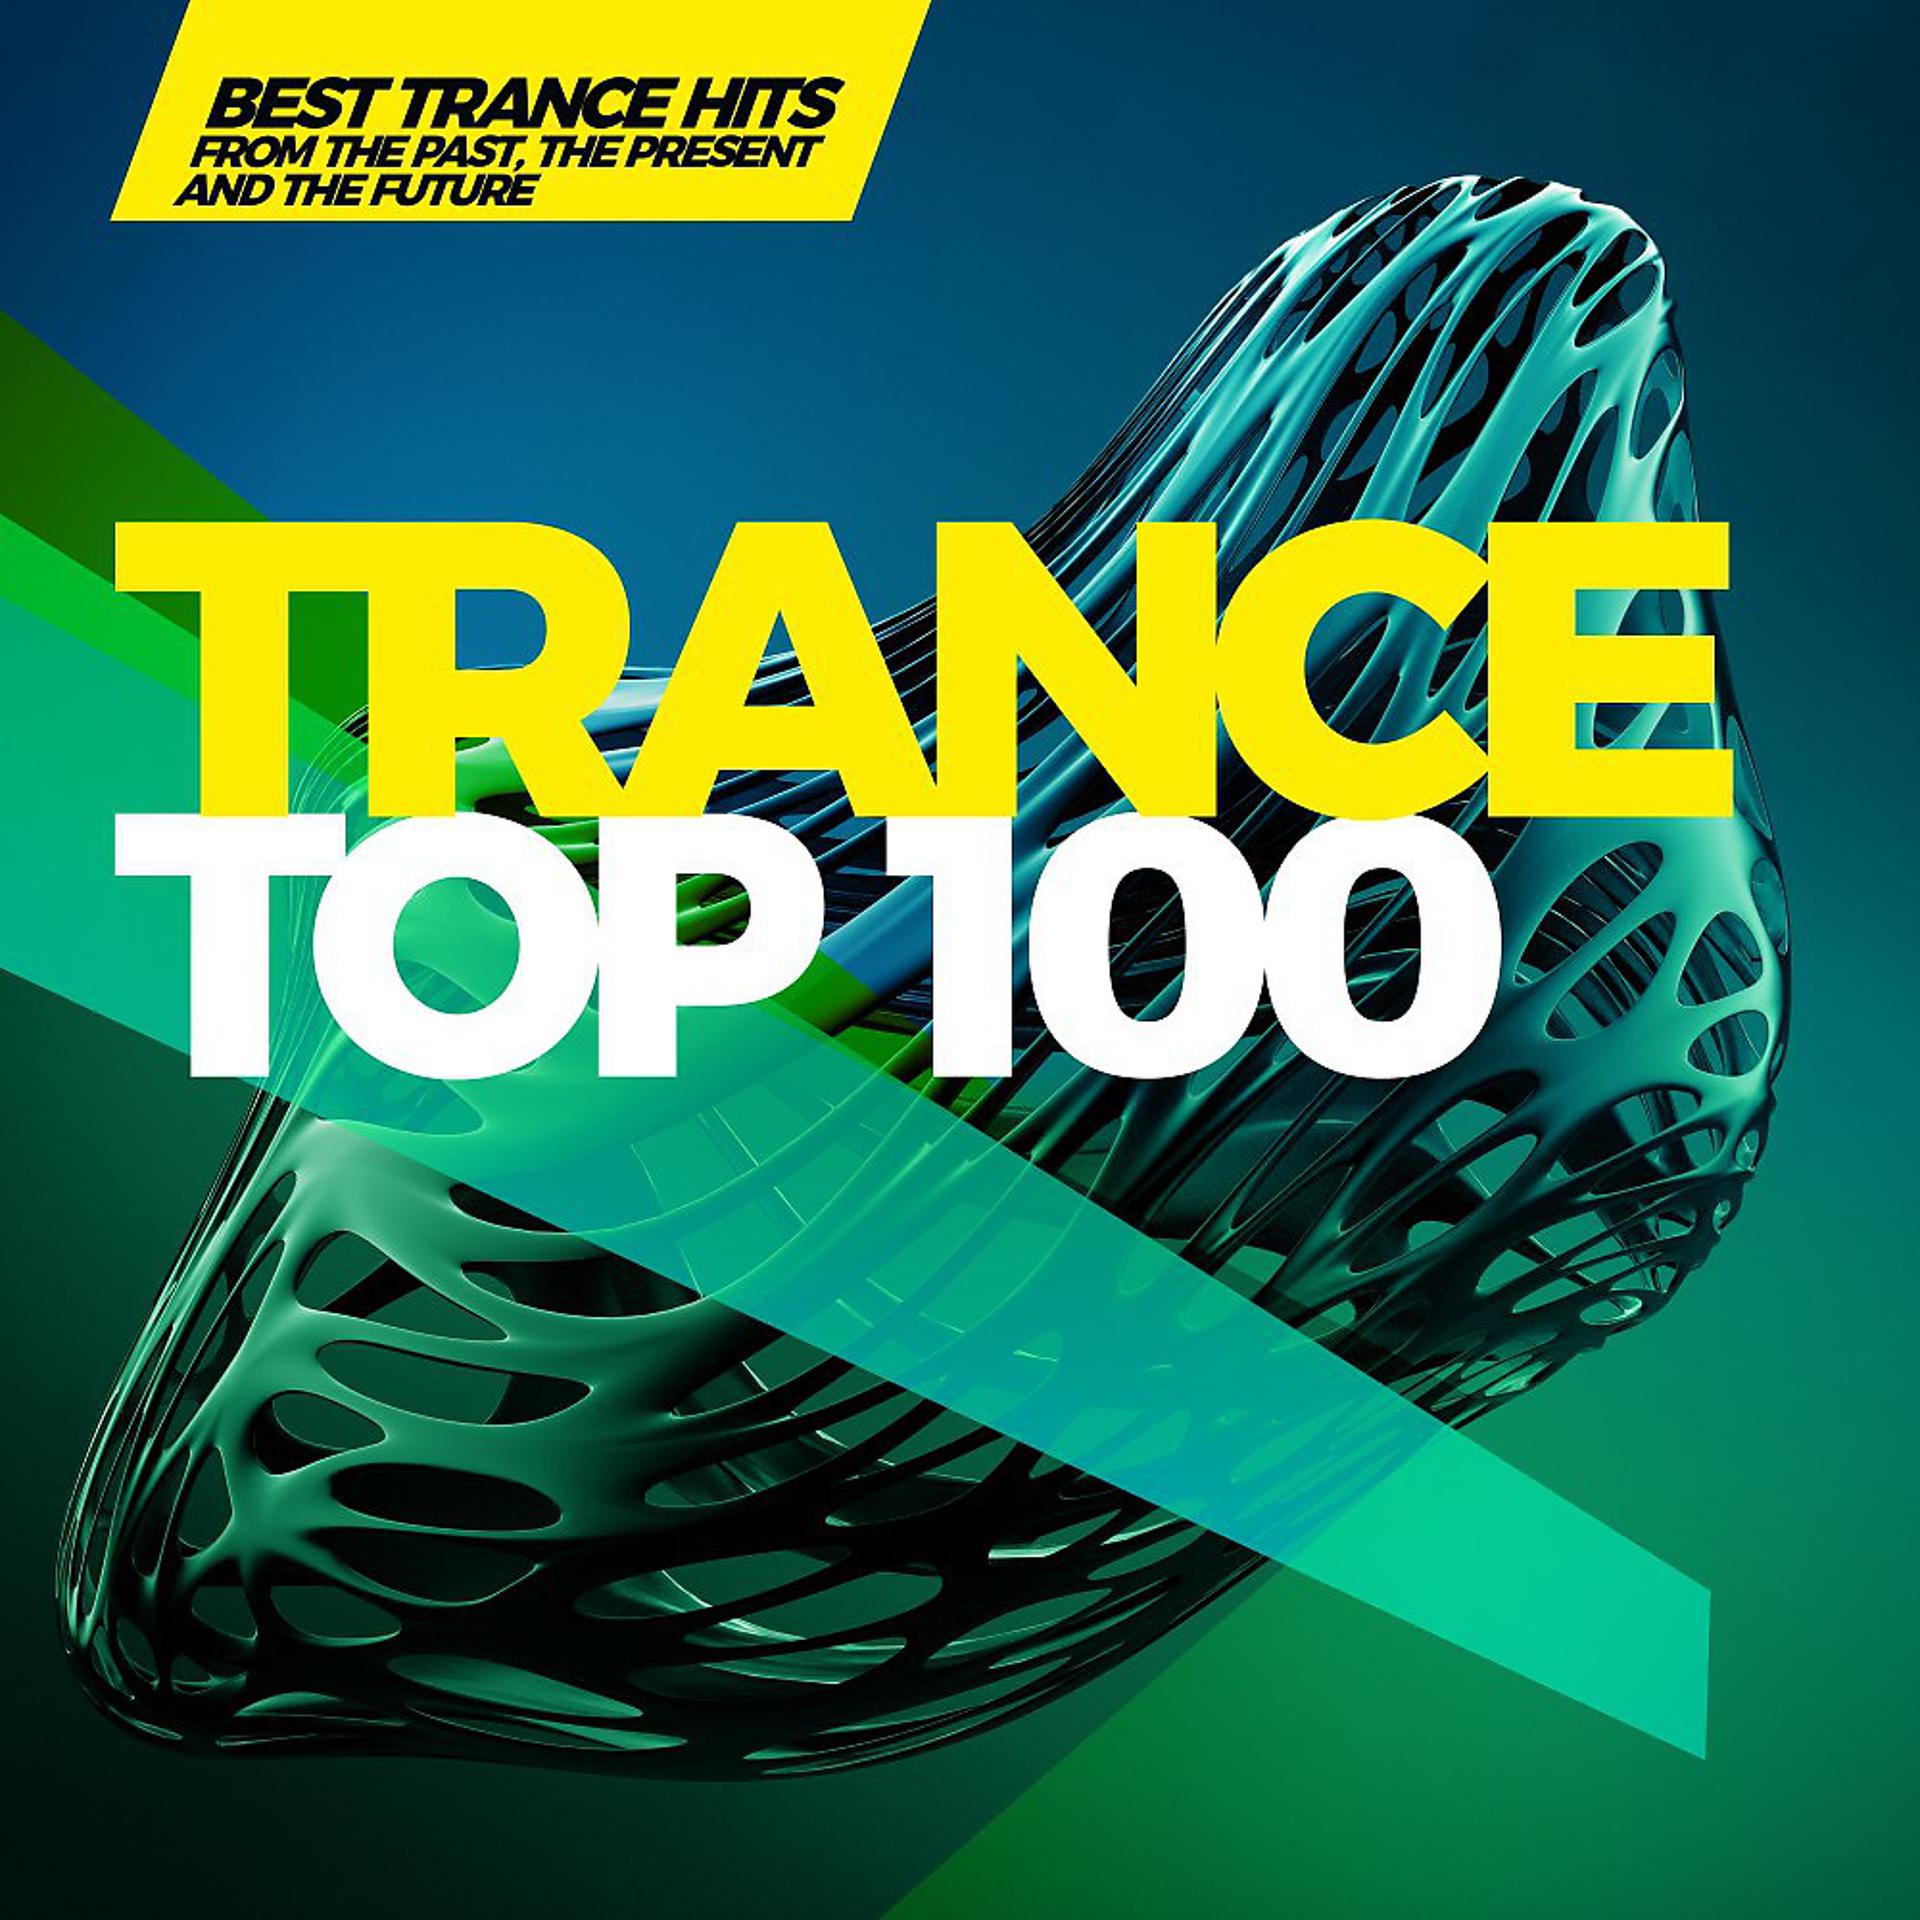 Постер альбома Trance Top 100 - The Best Trance Hits from the Past, the Present and the Future